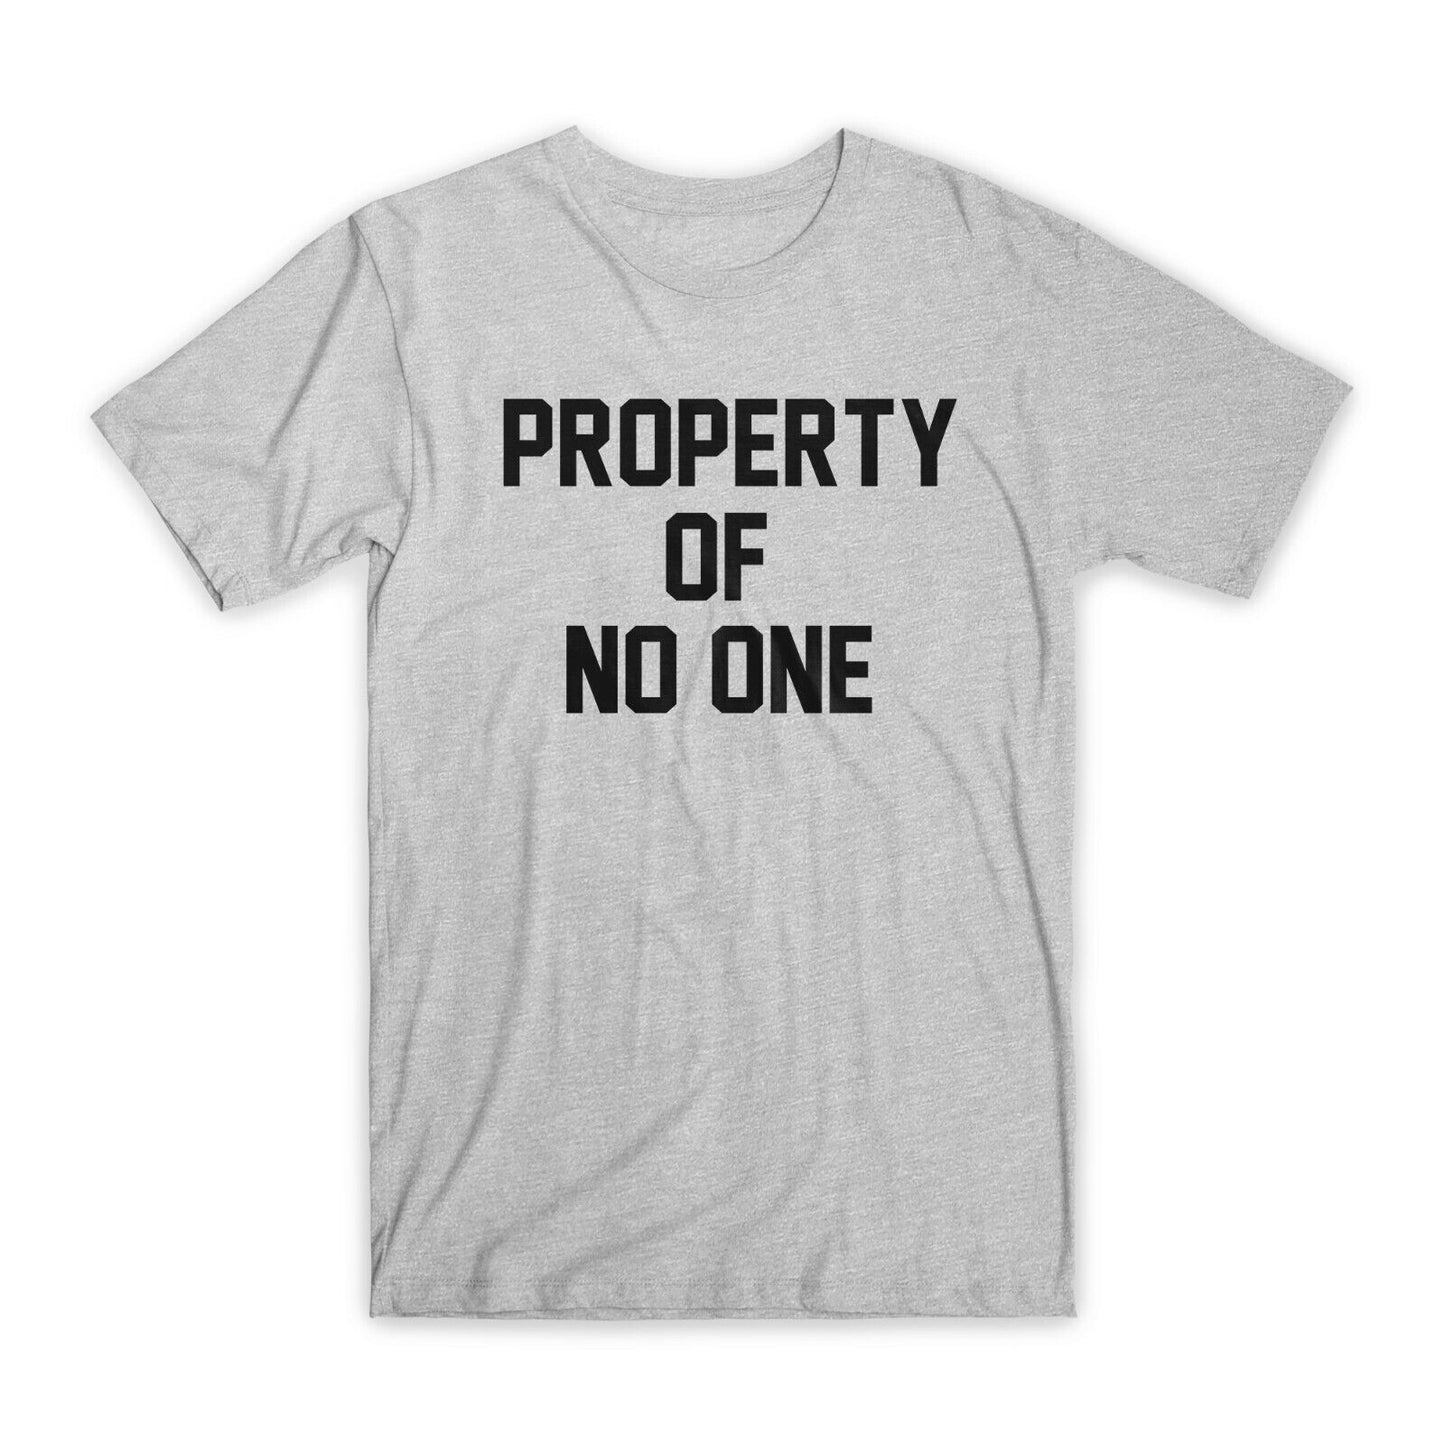 Property of No One T-Shirt Premium Soft Cotton Crew Neck Funny Tees Gifts NEW